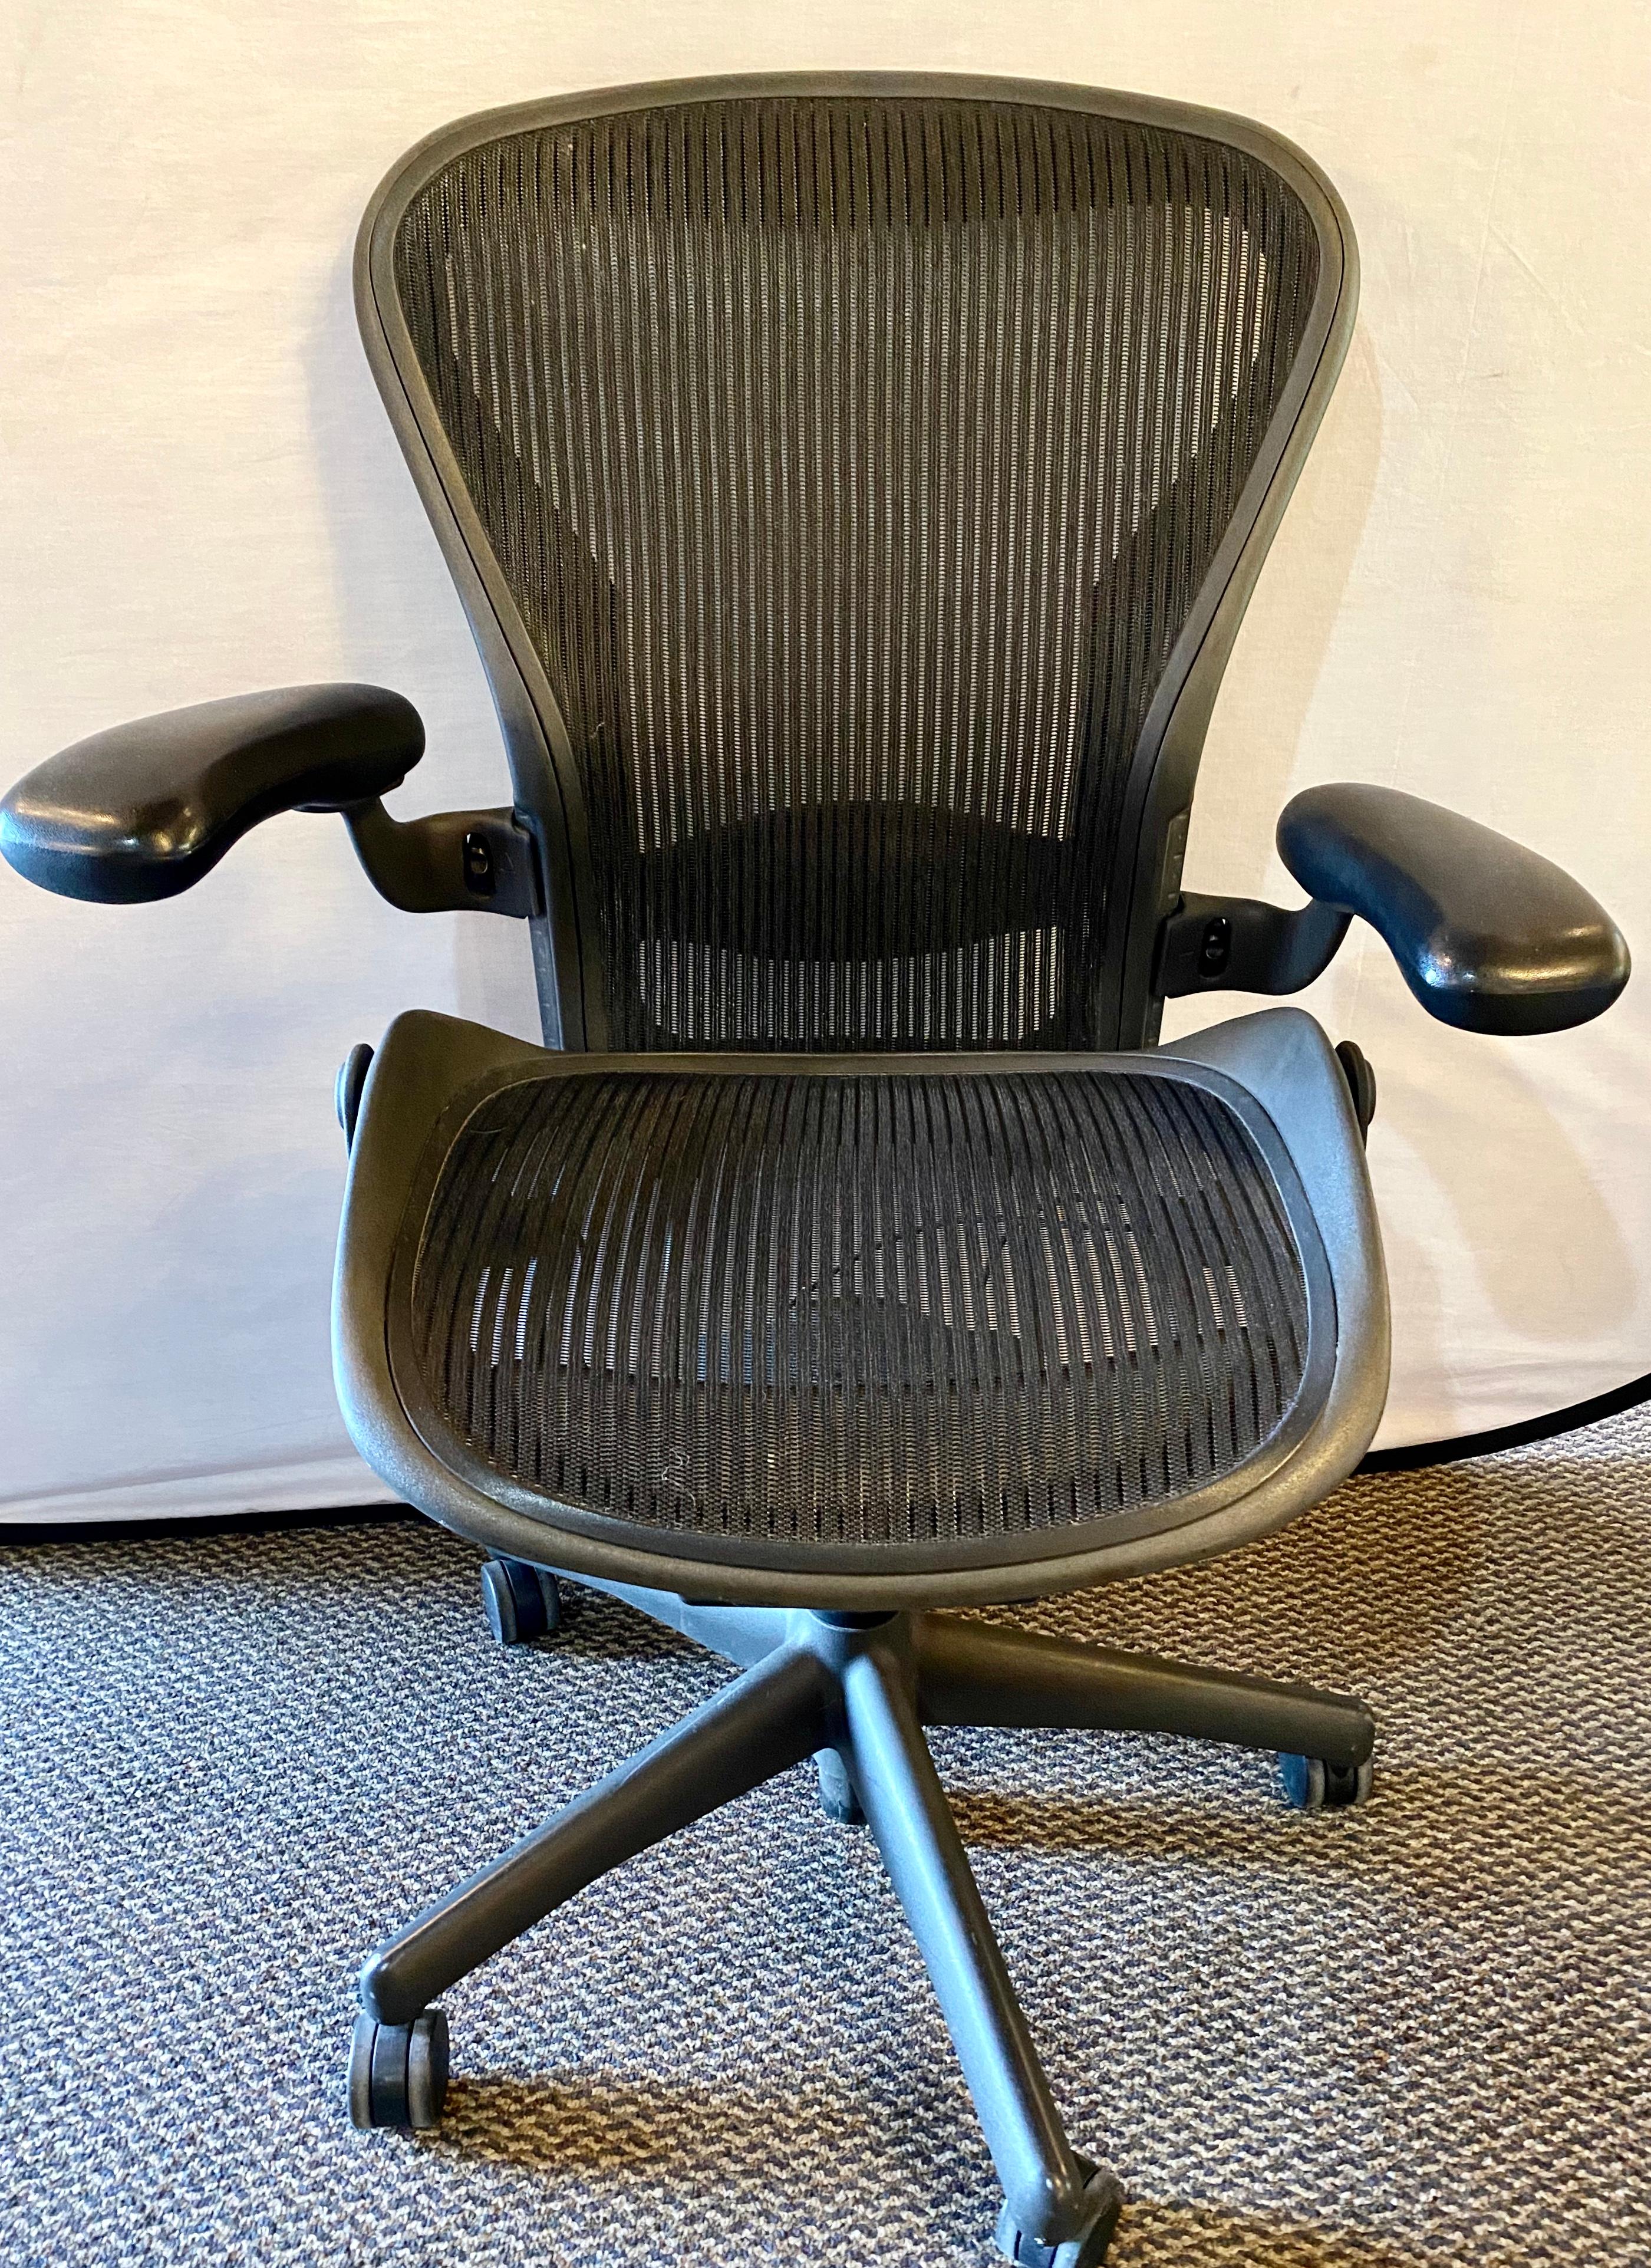 Herman Miller 'Aeron' office chair in graphite medium size.
Adjustable seat height ranges from 16 to 20.5 inches.